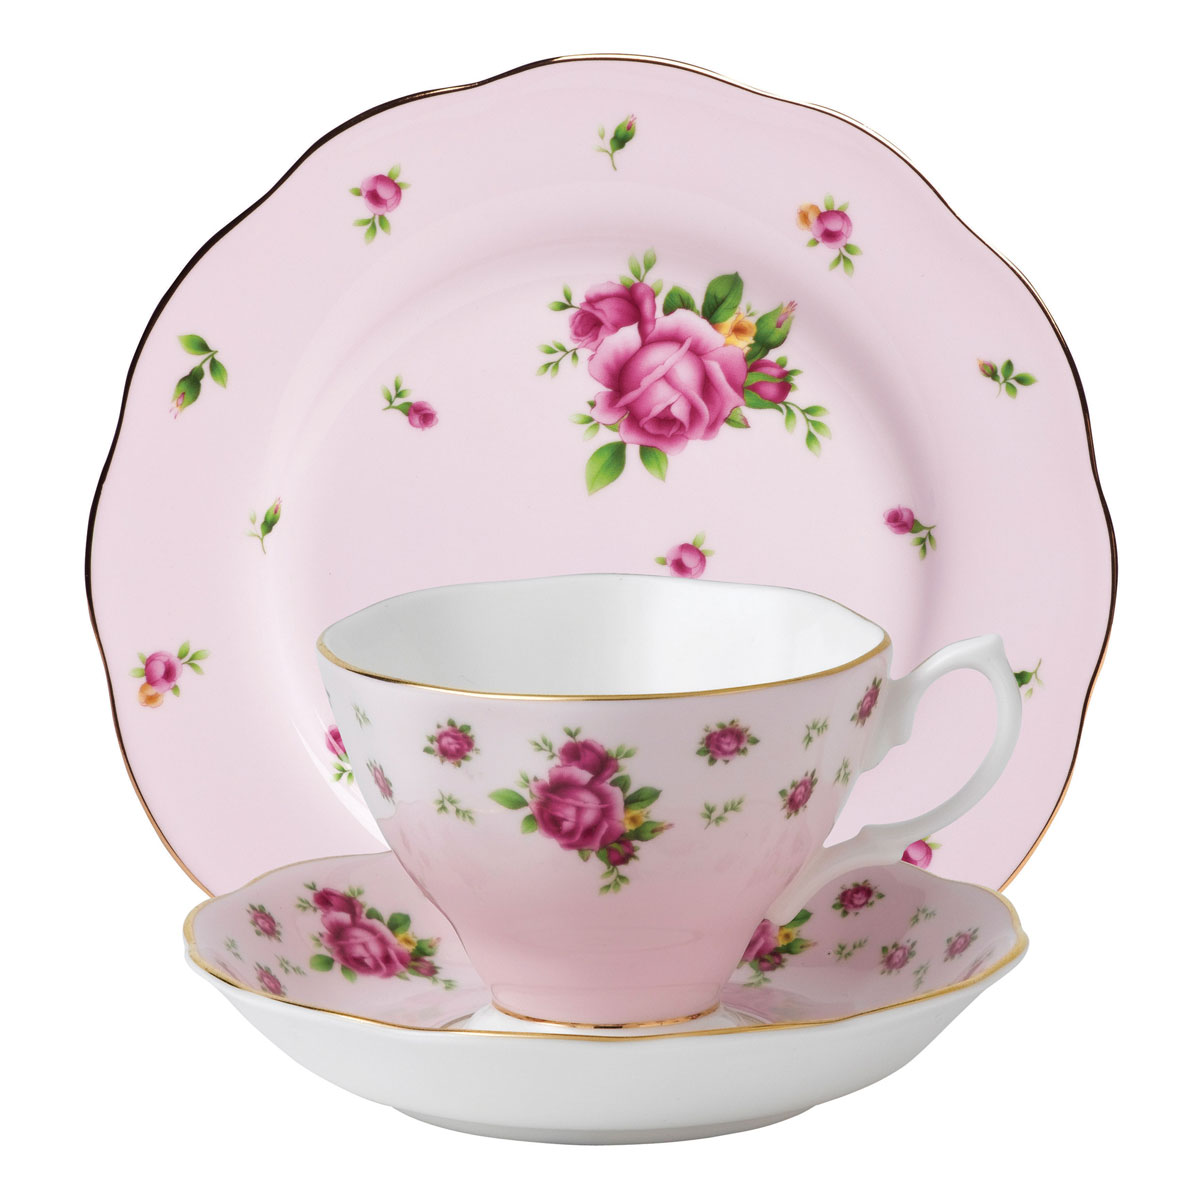 Royal Albert China New Country Roses Pink 3-Piece Set - Teacup, Saucer and Dessert Plate